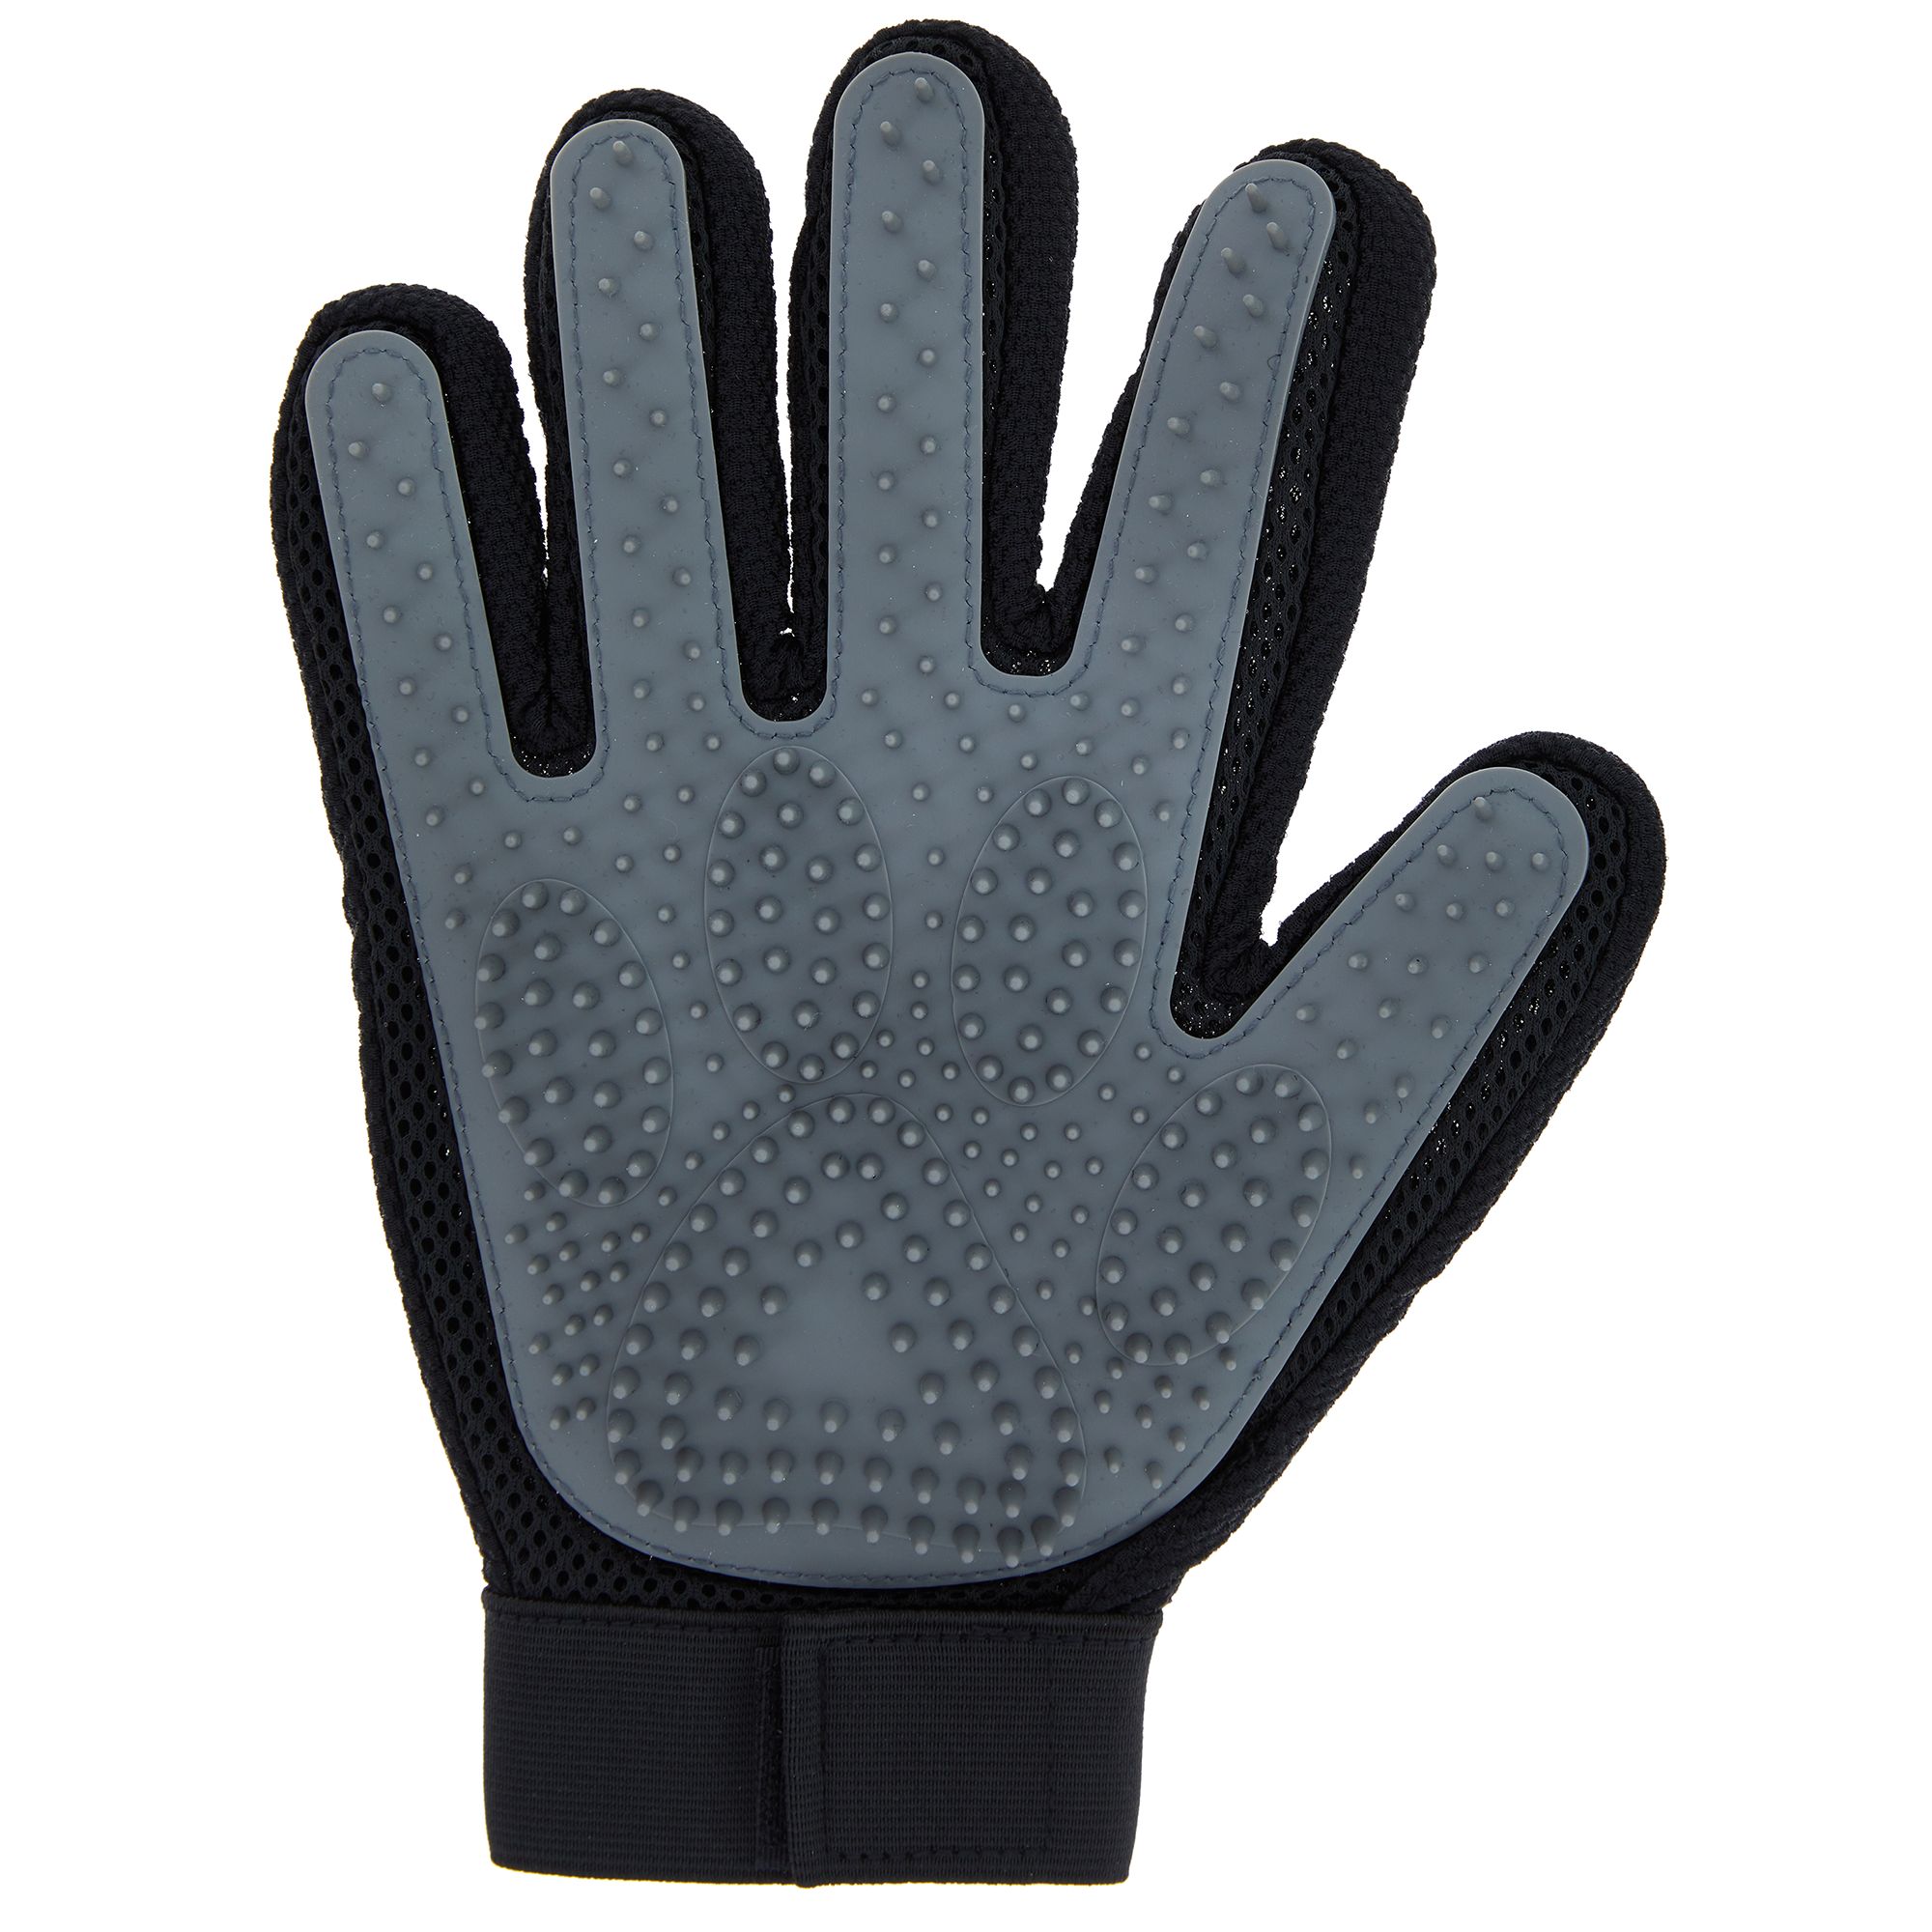 Pet Grooming Glove - The Active Hands Company